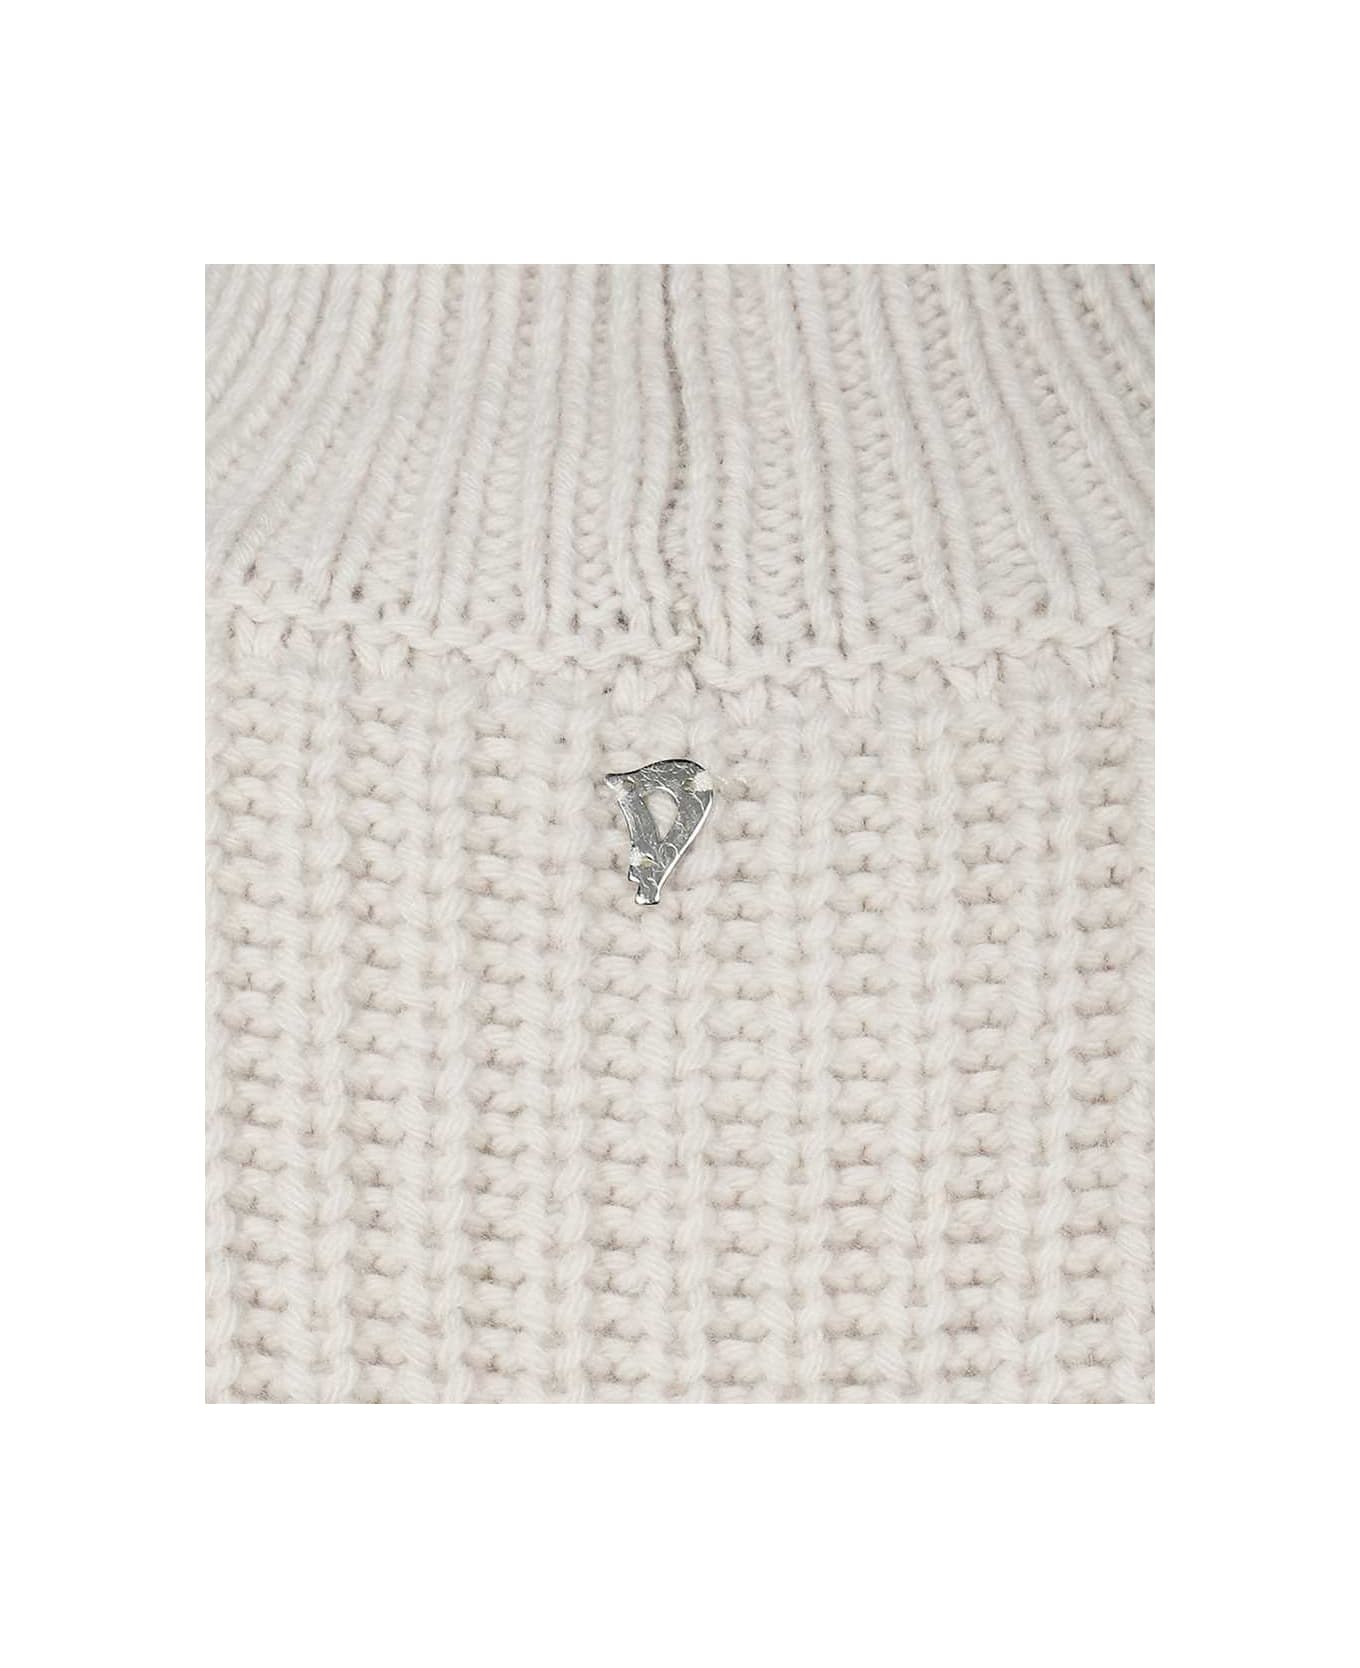 Dondup Wool And Cashmere Sweater - White